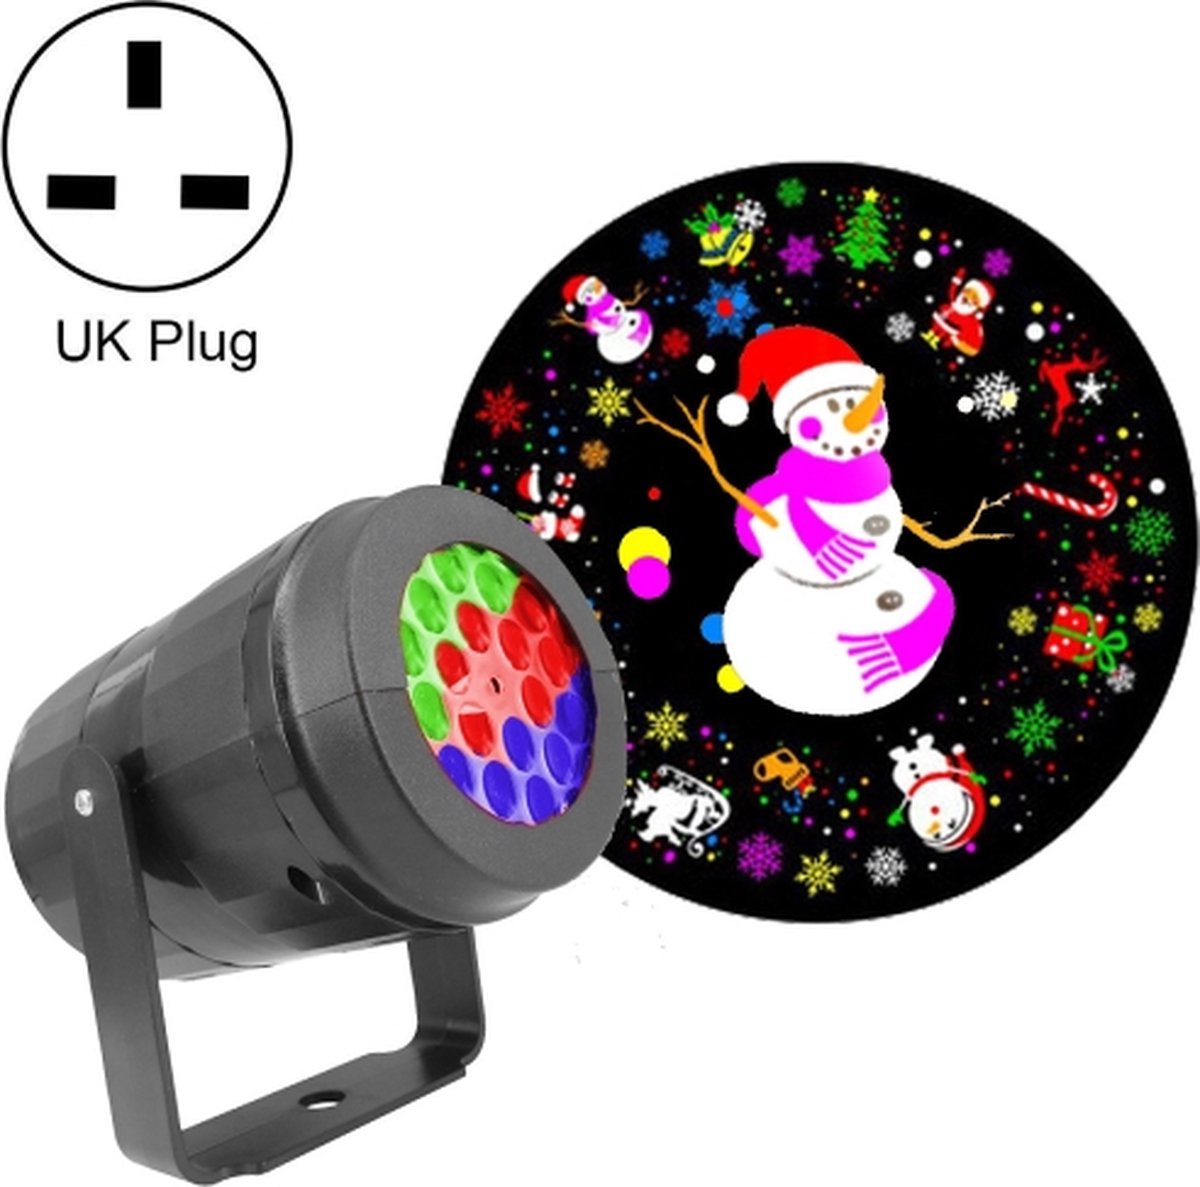 4W LED Snowflake Christmas Decoration Projector Light with 16 Patterns, Spec: UK Plug